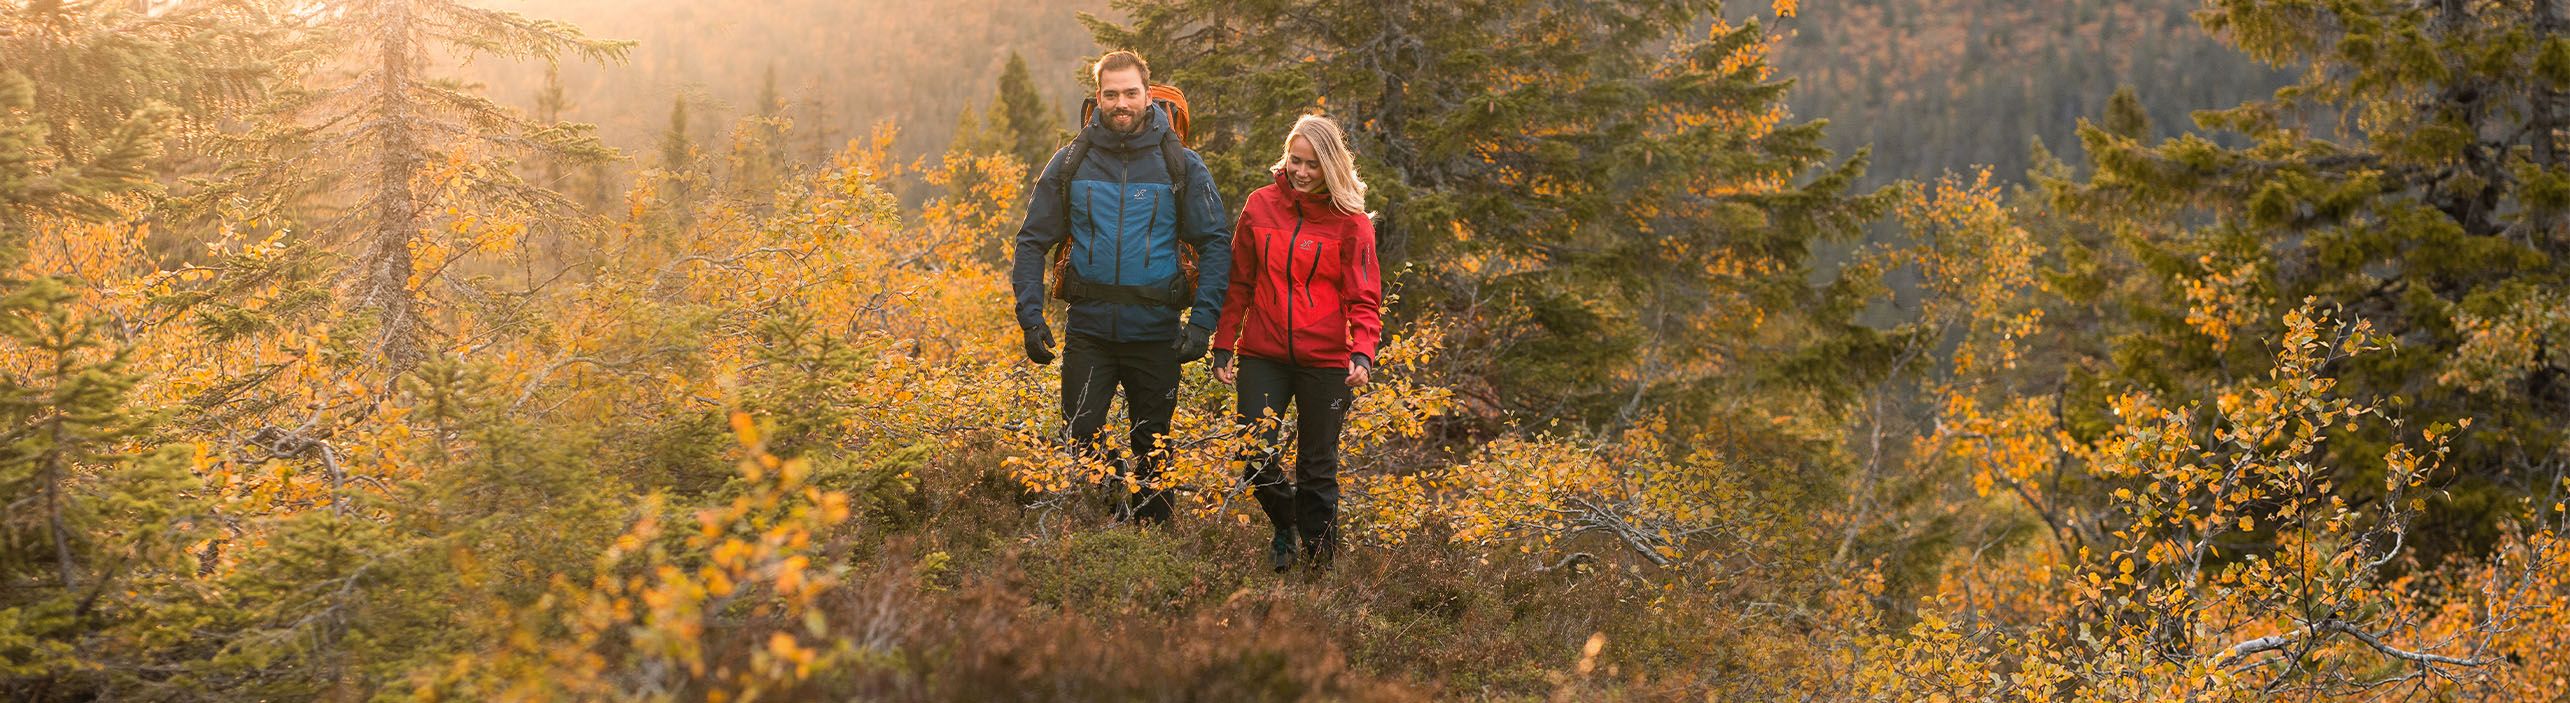 man and woman hiking in the fall.jpeg